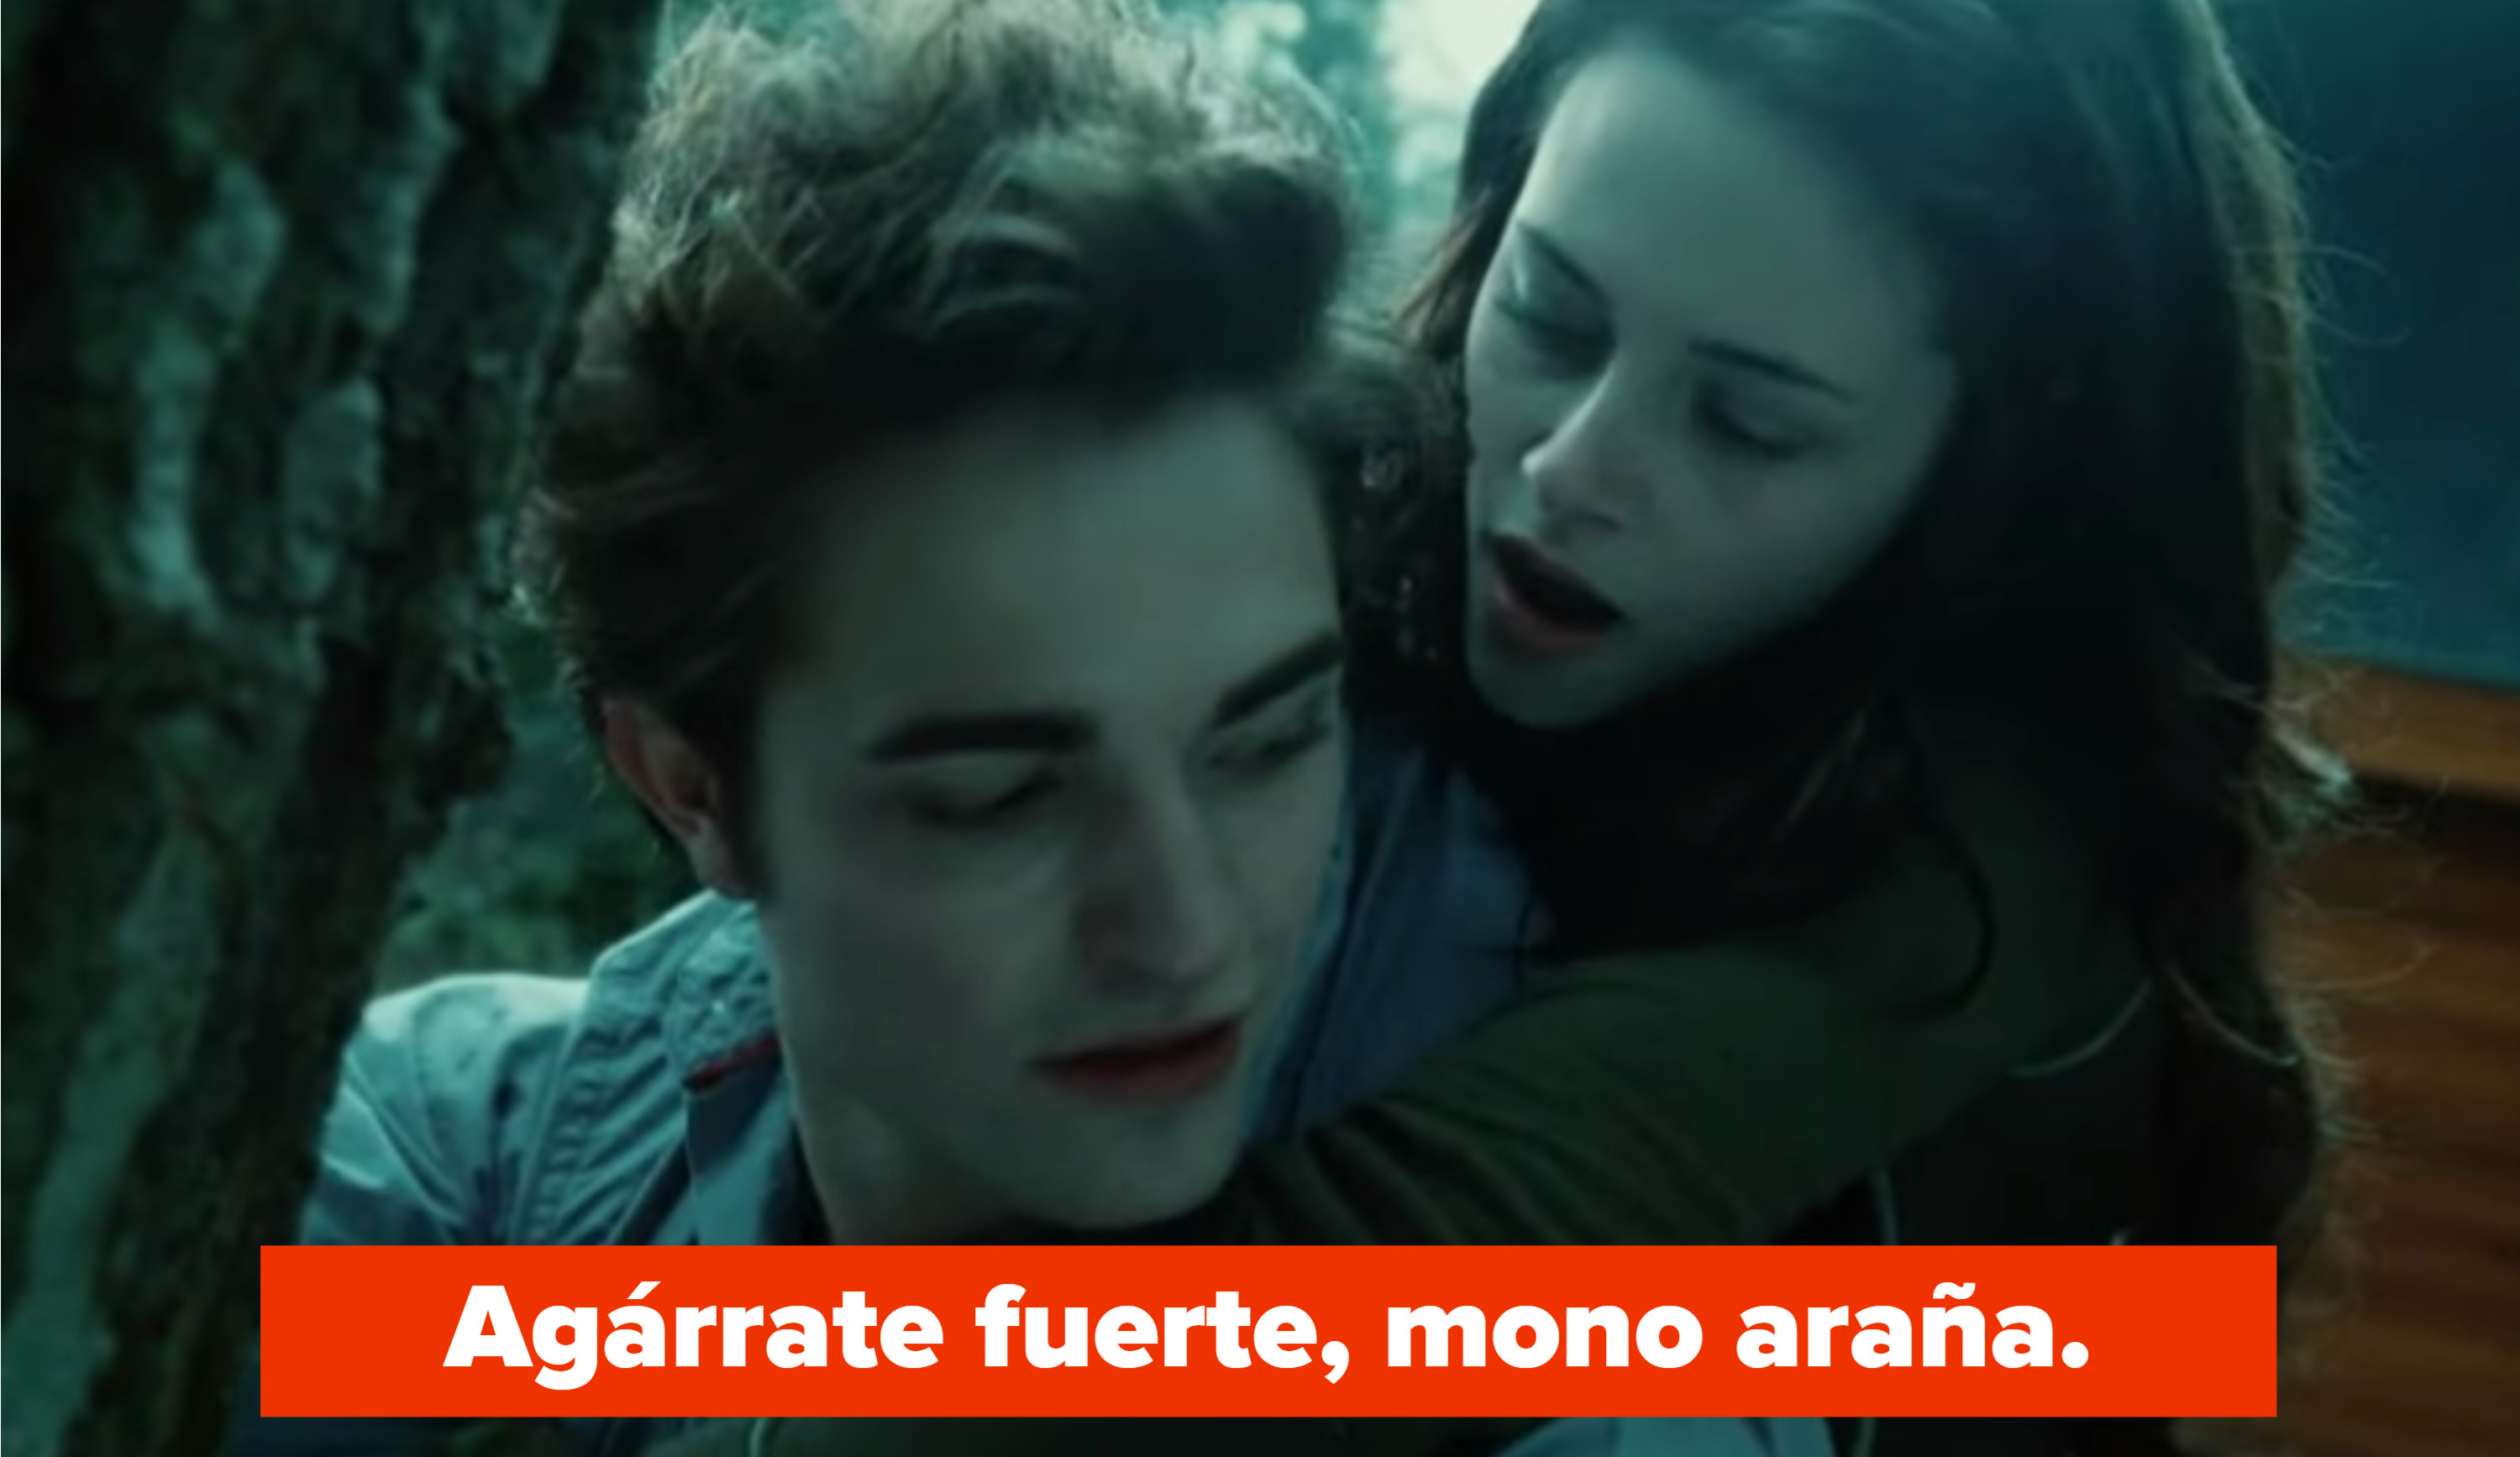 Edward to Bella: &quot;Hold on tight, spider monkey&quot;